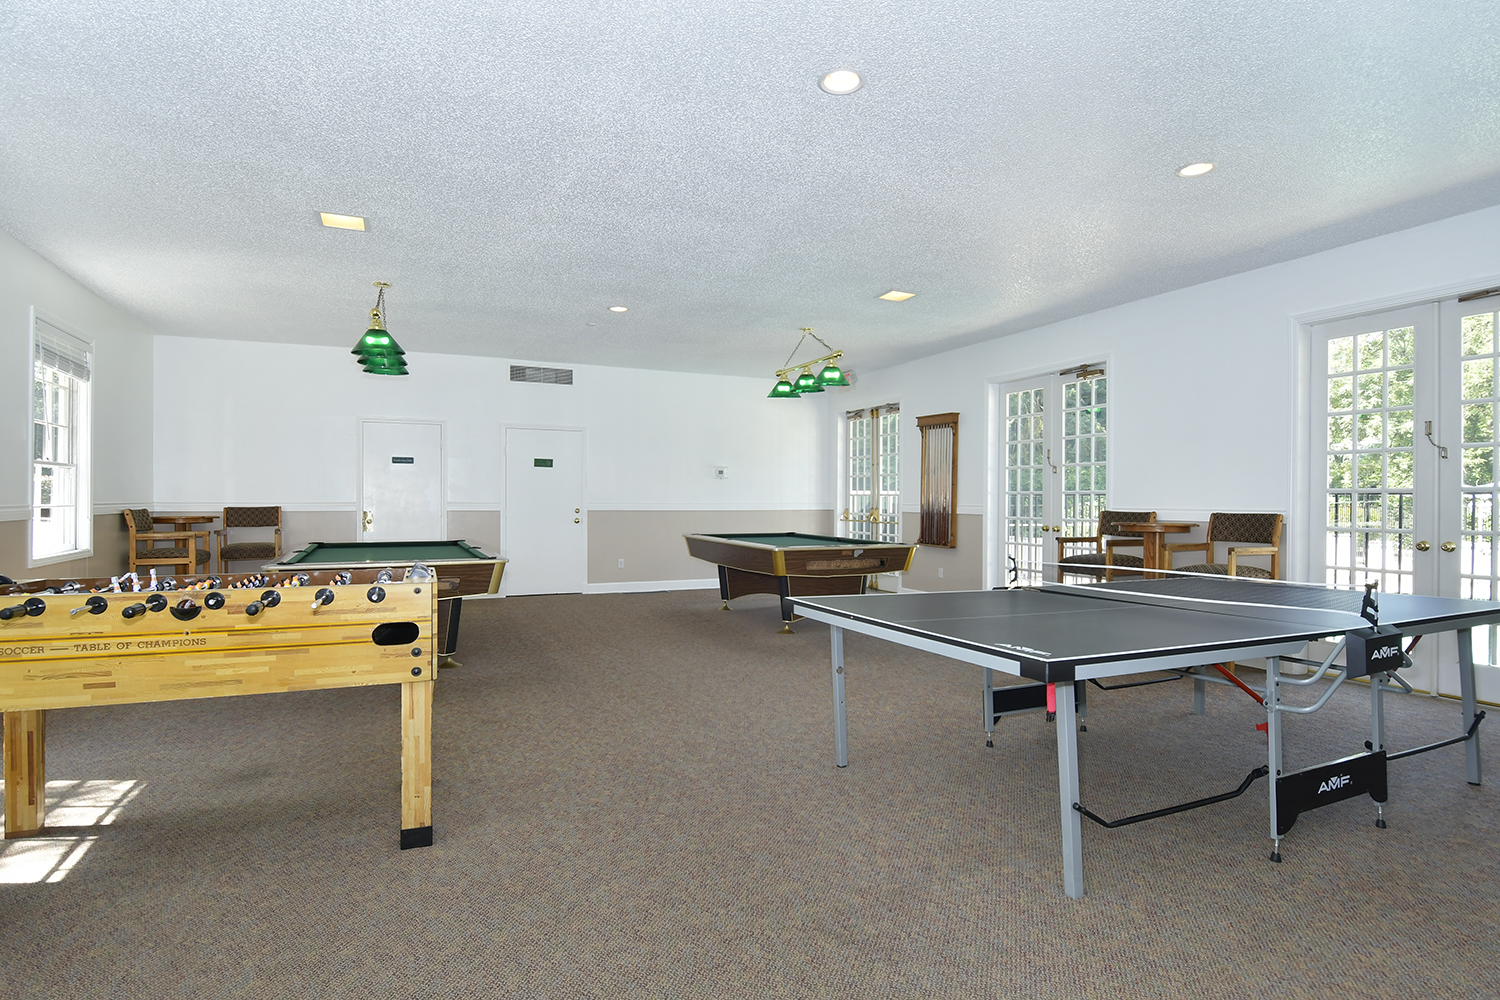 Game room with Foosball, ping pong and two pool tables.